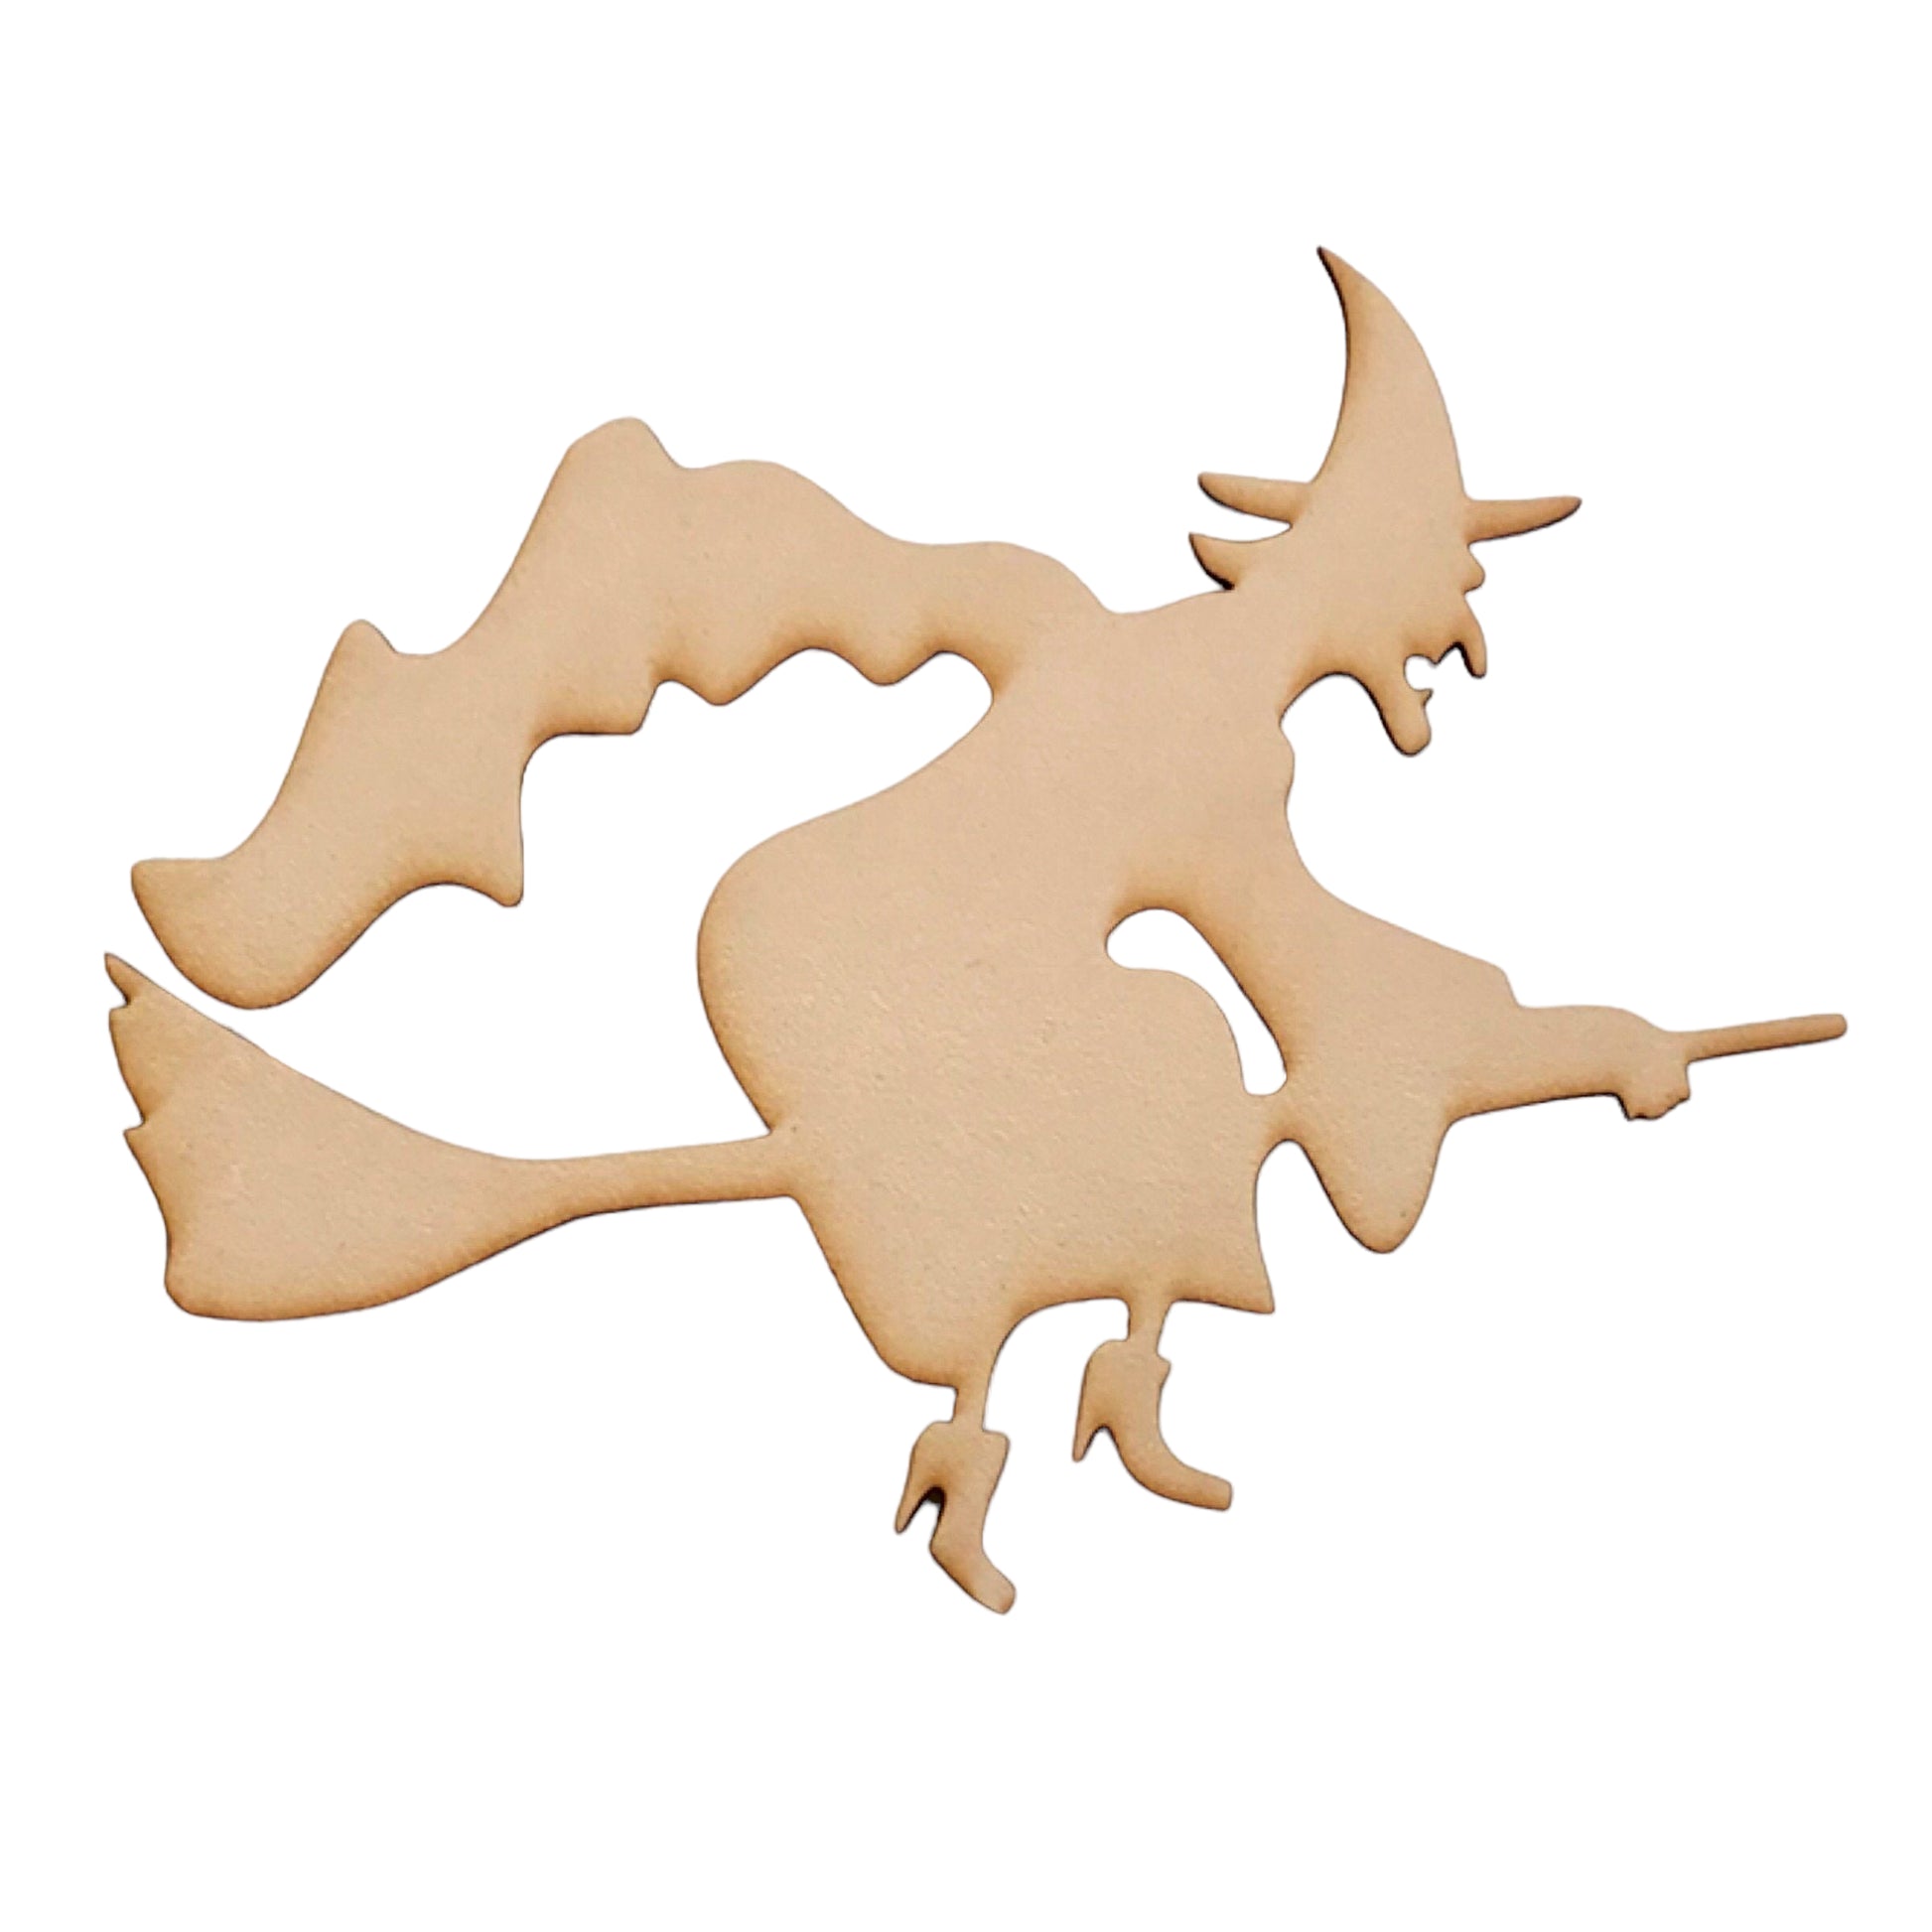 Witch On Broom Stick MDF DIY Raw Cut Out Art Craft Decor - The Renmy Store Homewares & Gifts 